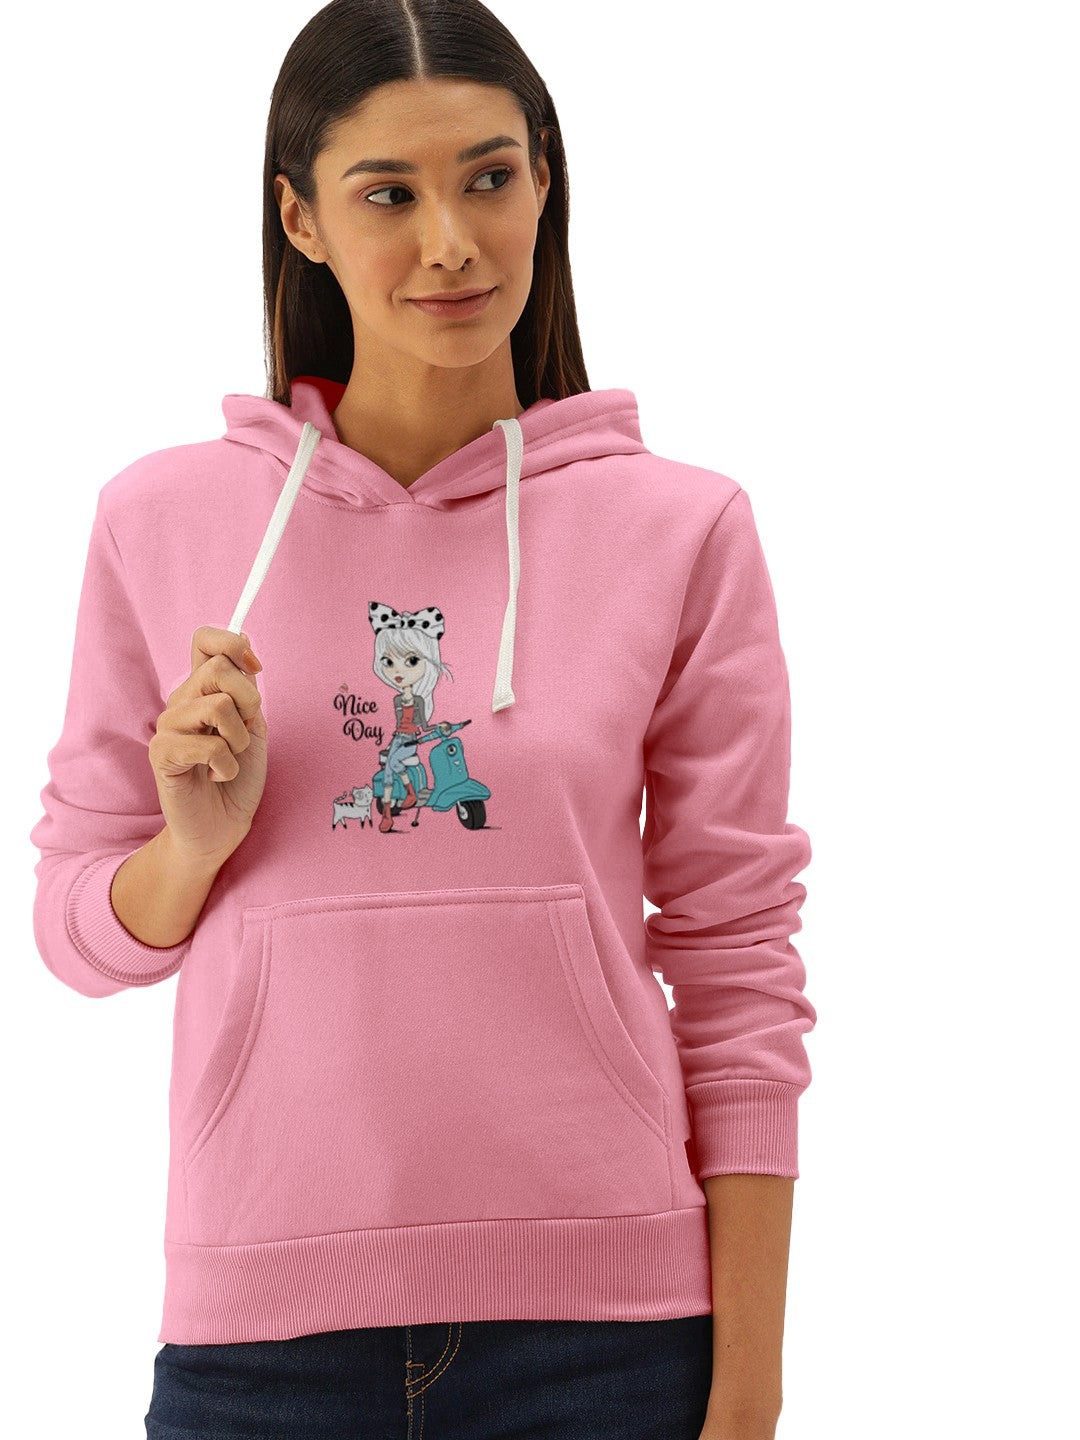 Nice Day Printed Premium Quality Hoodie For Women